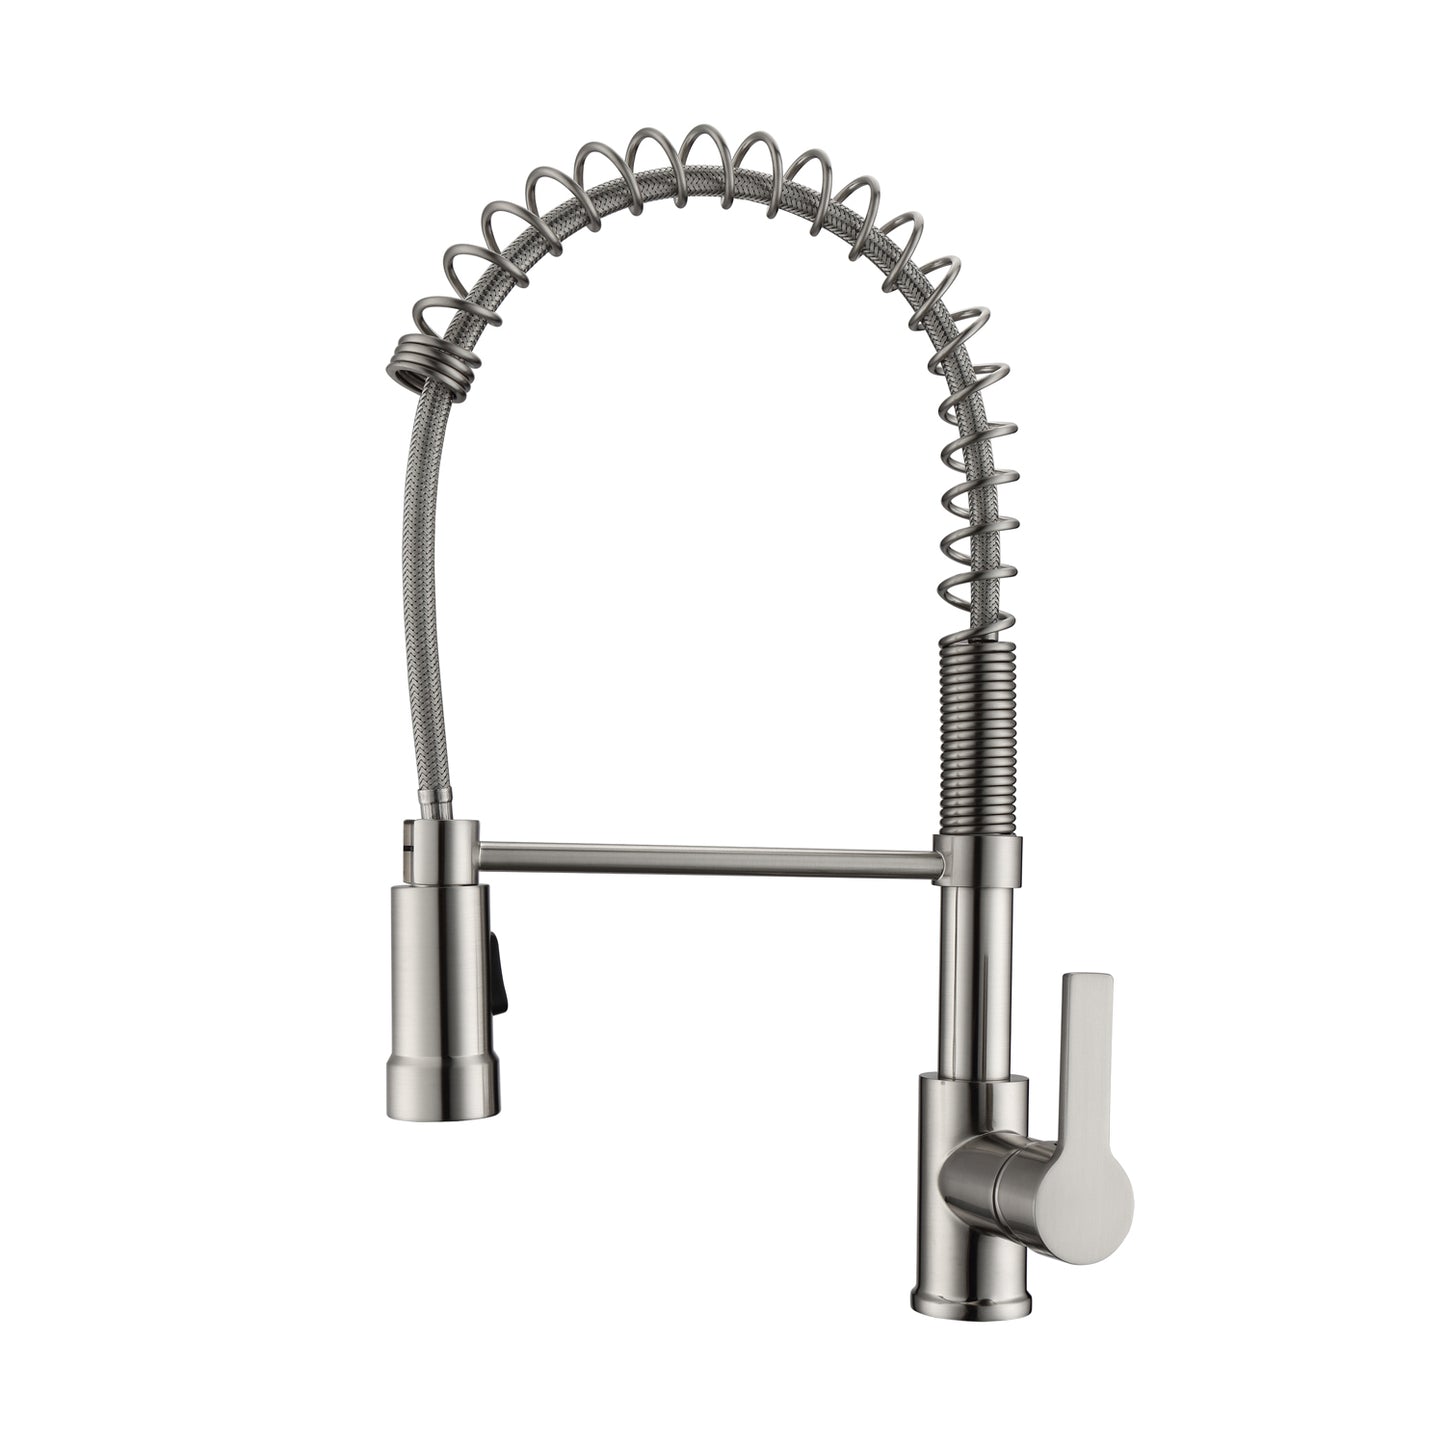 Nueva 2 Kitchen Faucet, Spring, Pull-out Sprayer, Lever Handle, Brushed Nickel